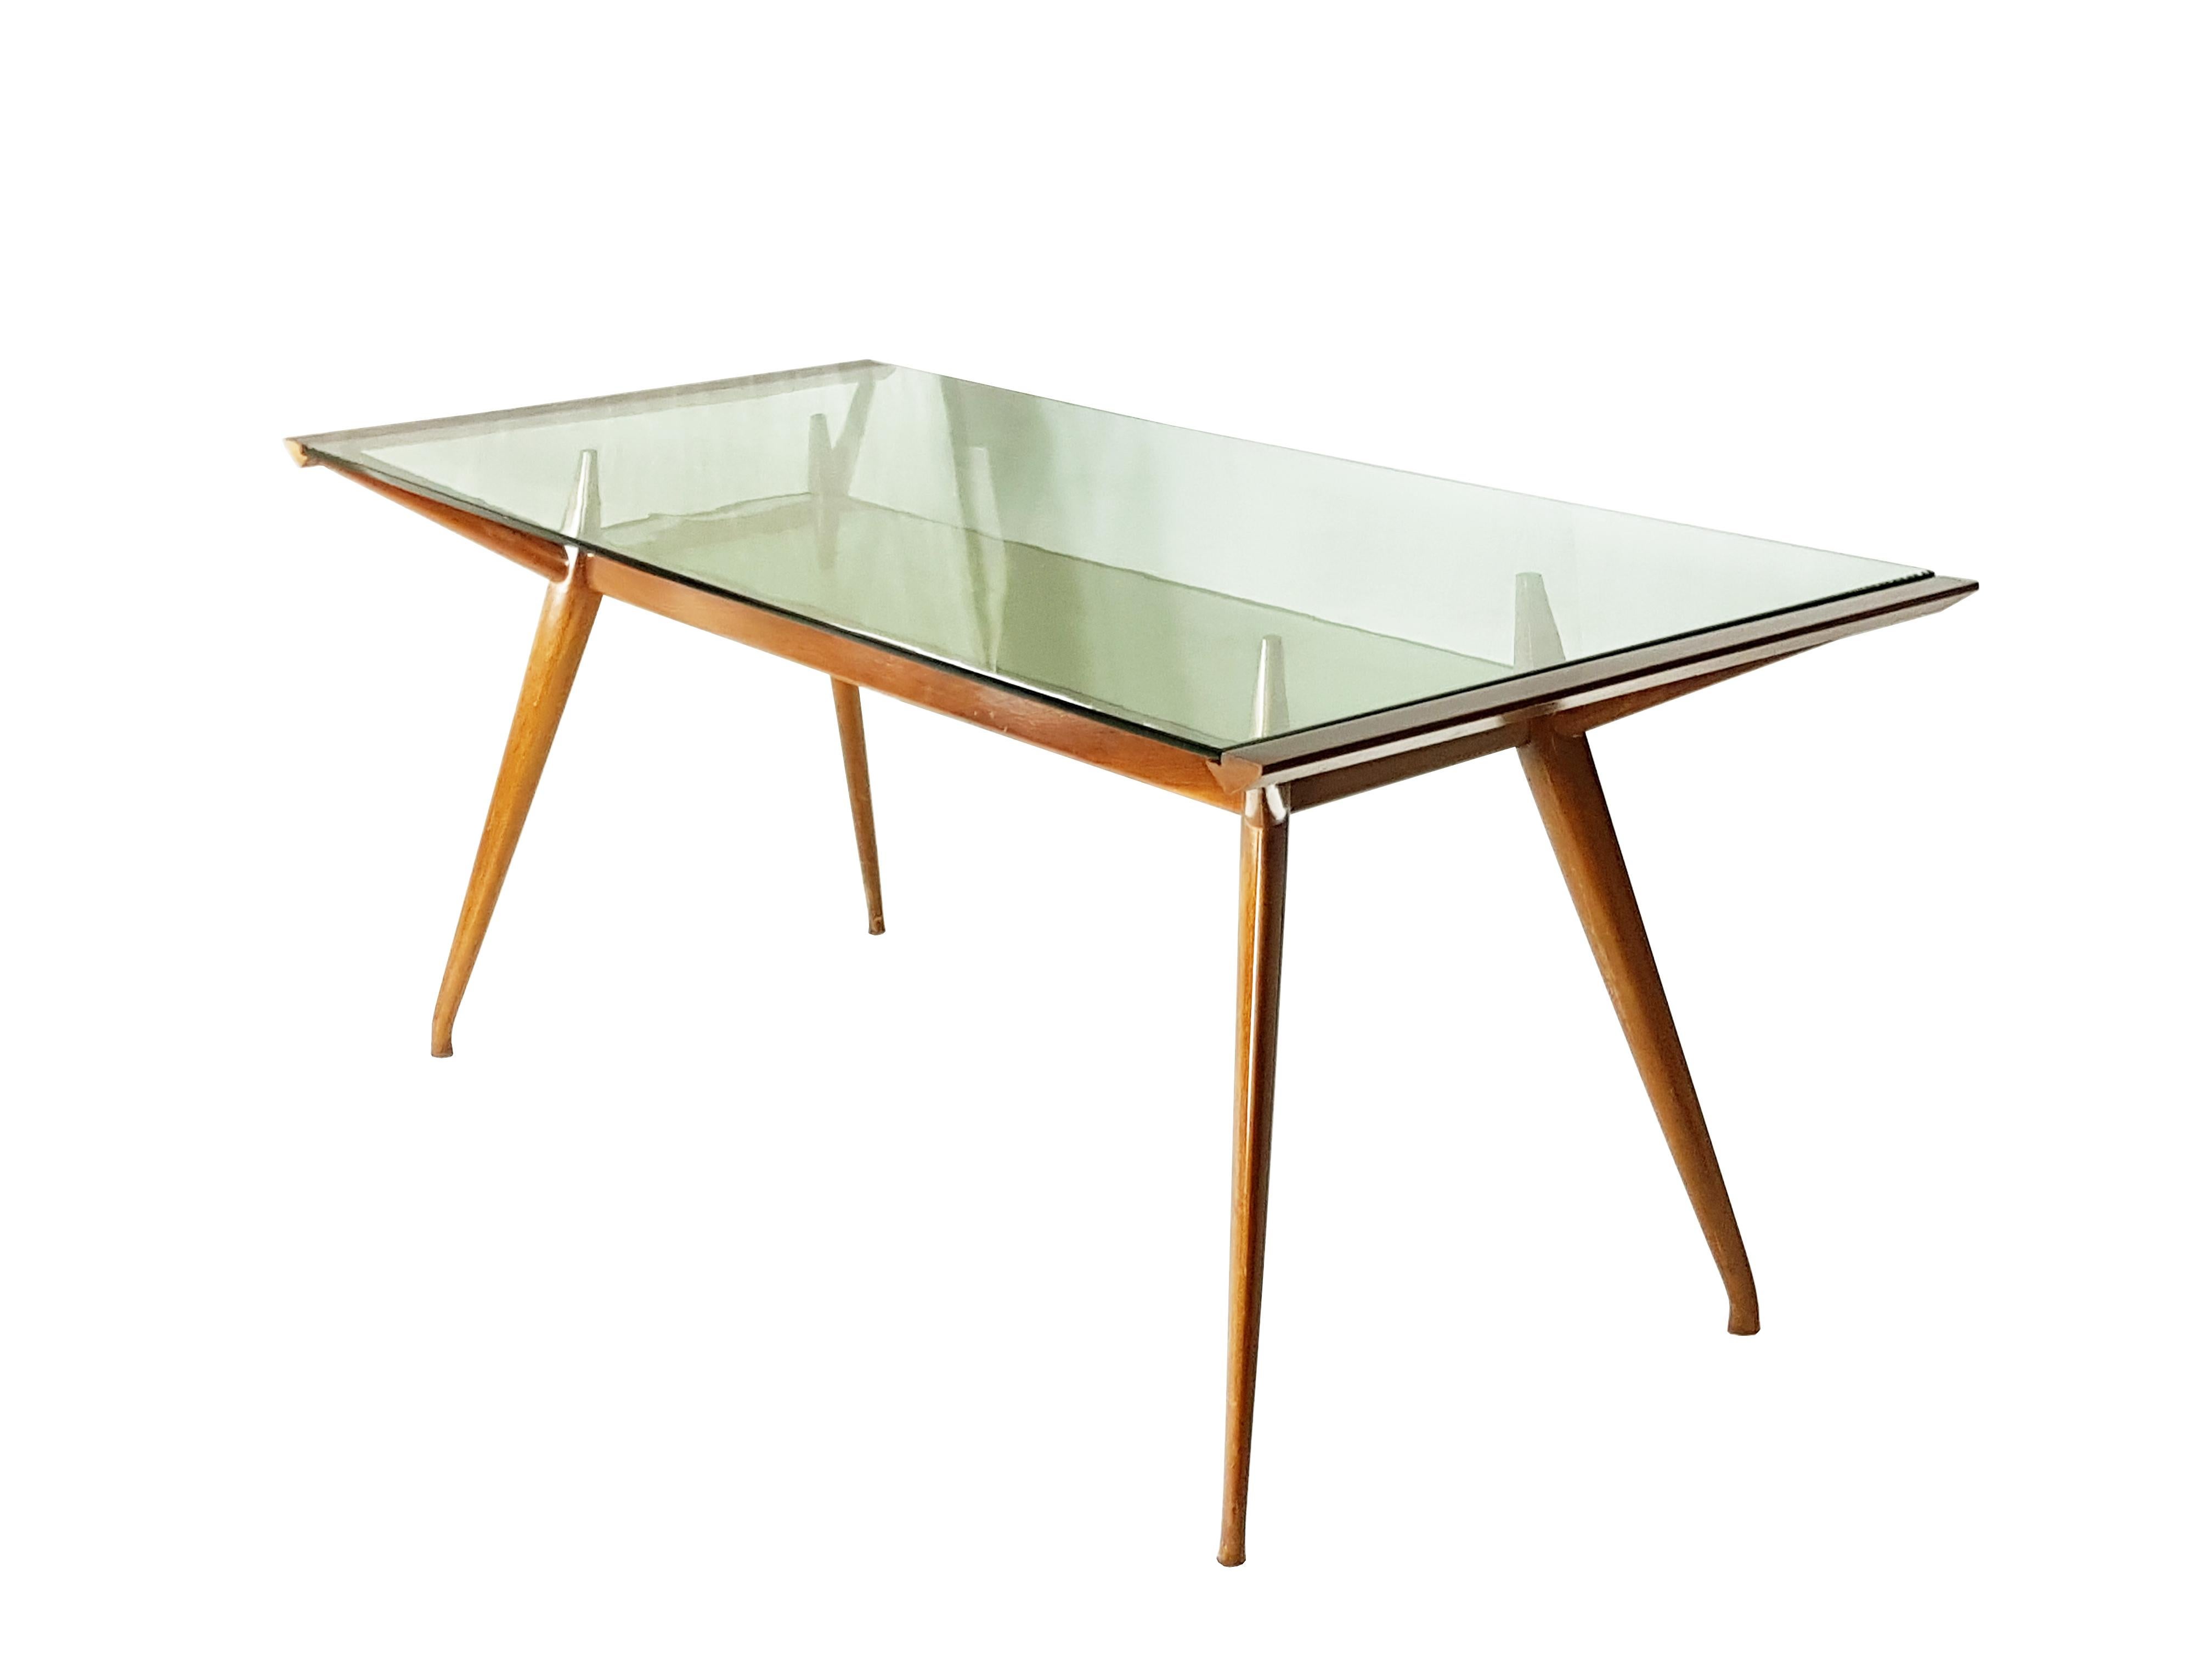 Mid-20th Century Italian Beech wood & Glass Mid-Century Modern dining table attributed to ISA For Sale